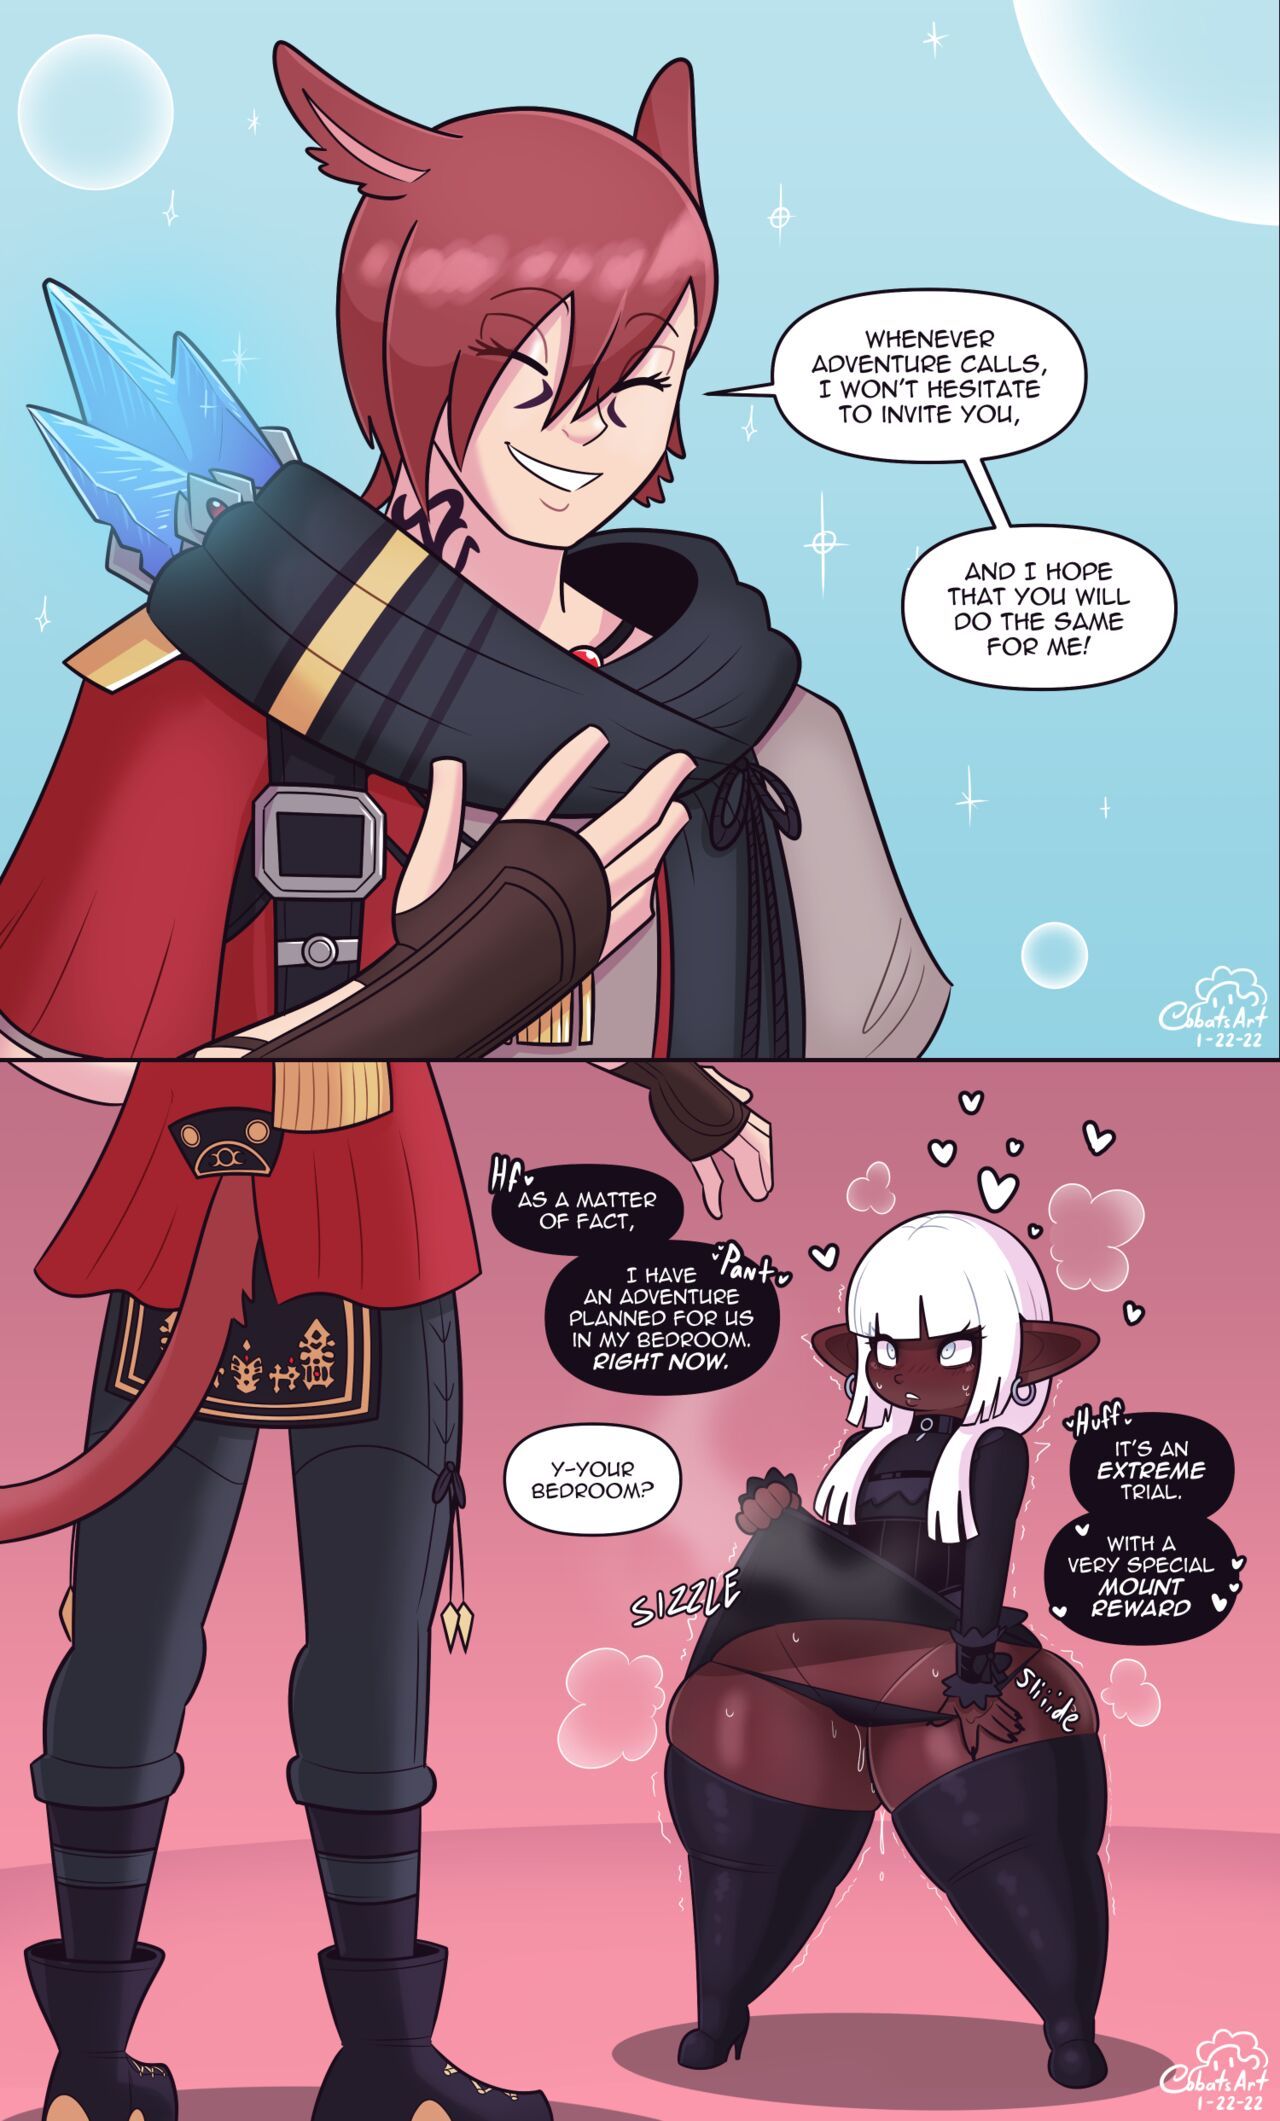 [Cobatsart] Mary Muffin: DRK Chocolate Cake (Final Fantasy XIV) Ongoing 6